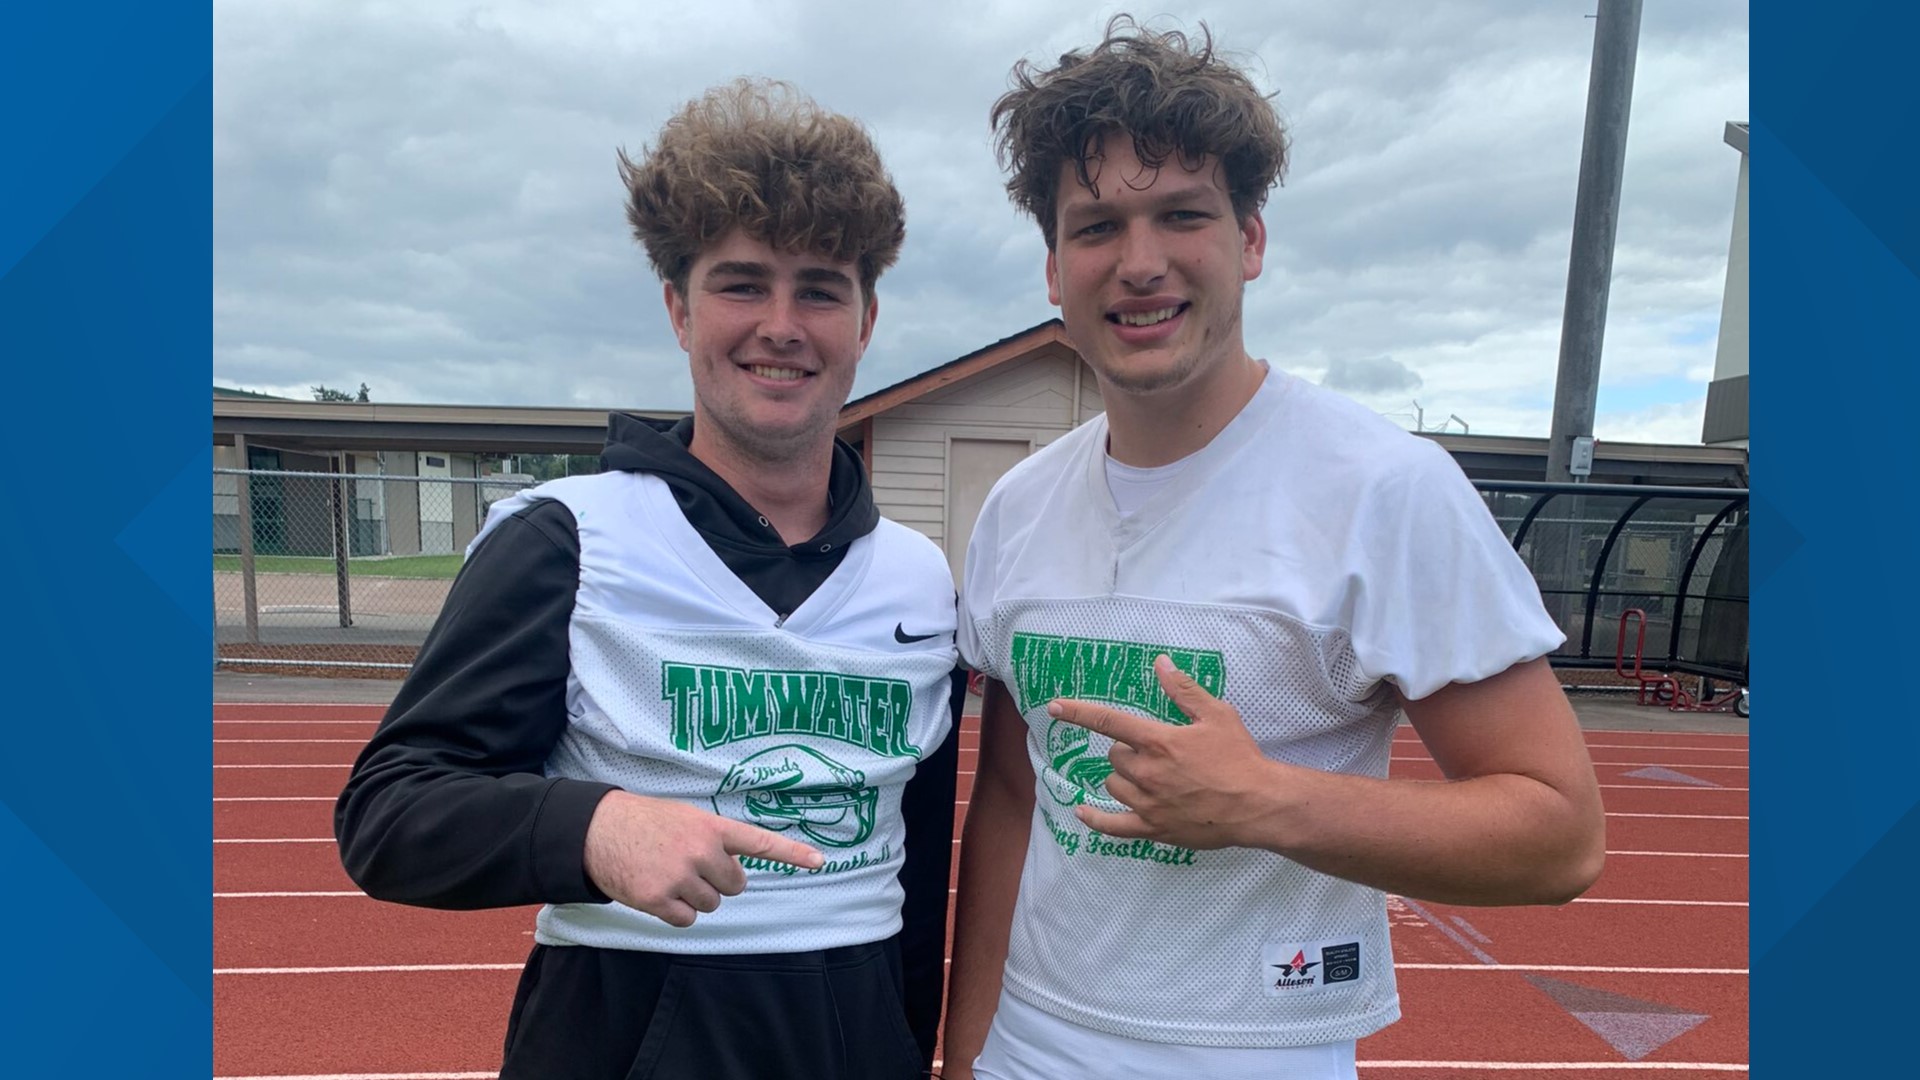 Tumwater tight ends Ryan Otton and Austin Terry are both nationally ranked and one of the best tight end duos in the state.